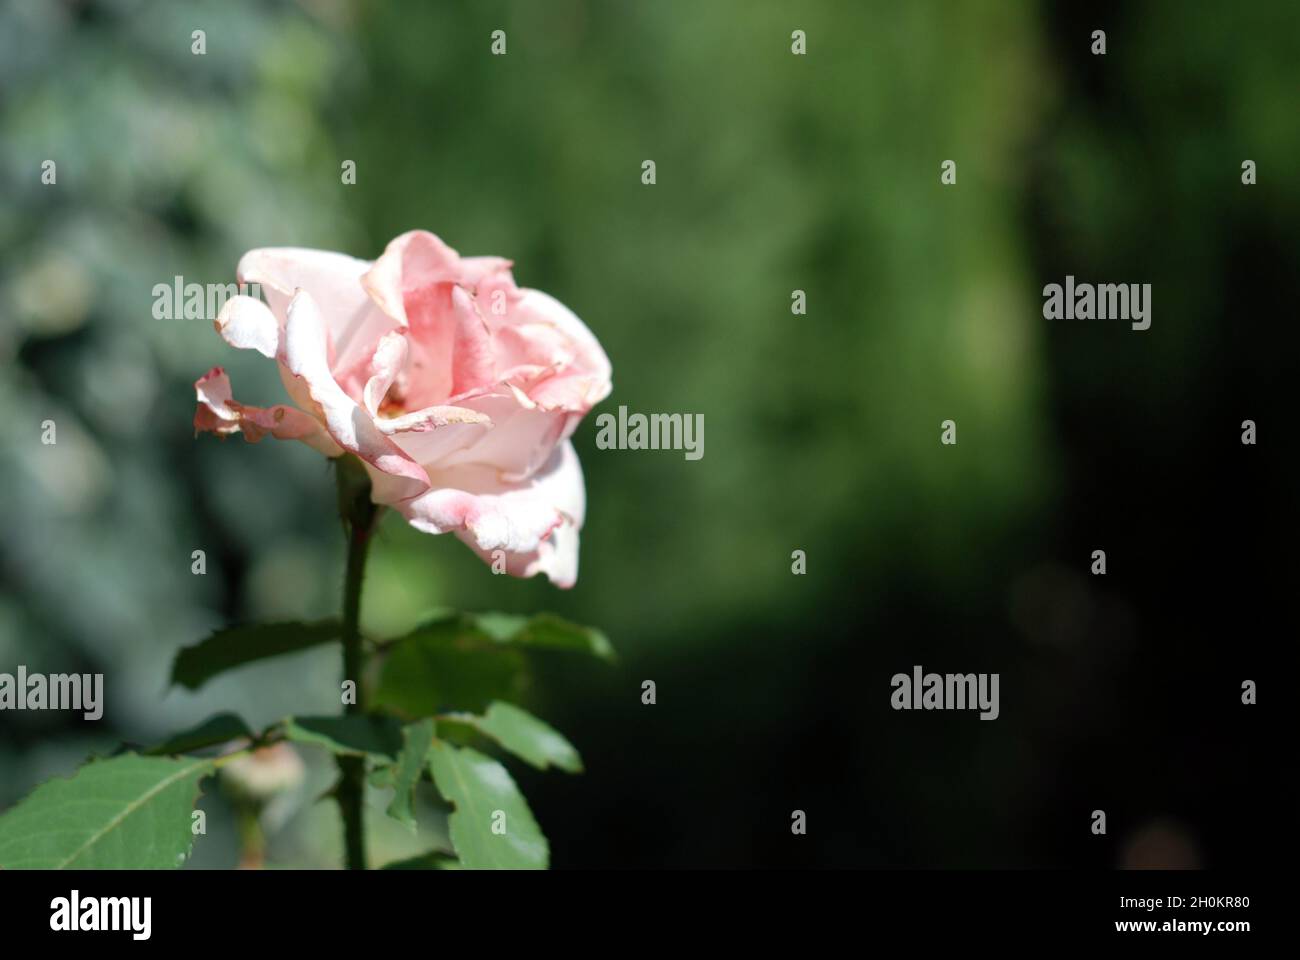 A close-up of a pink rose outdoors in a leafy green garden. Stock Photo